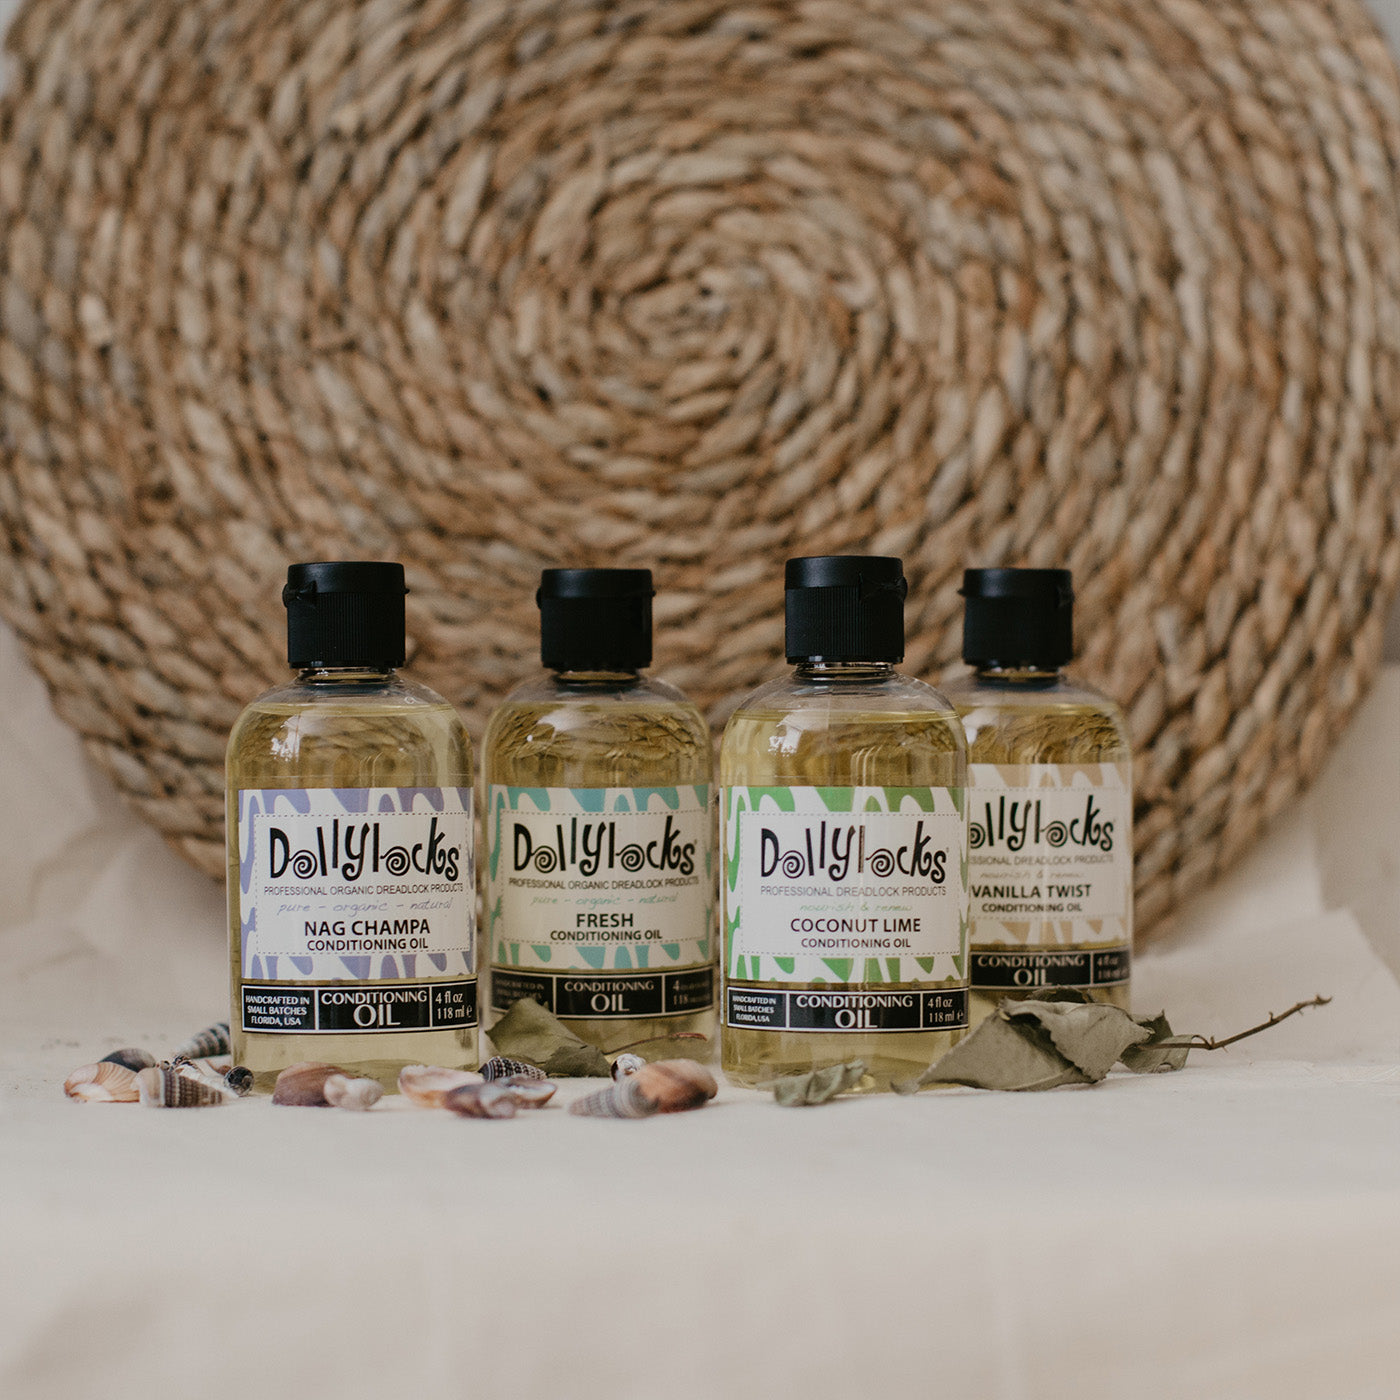 Dollylocks conditioning oil, Synthetic dreadlock care